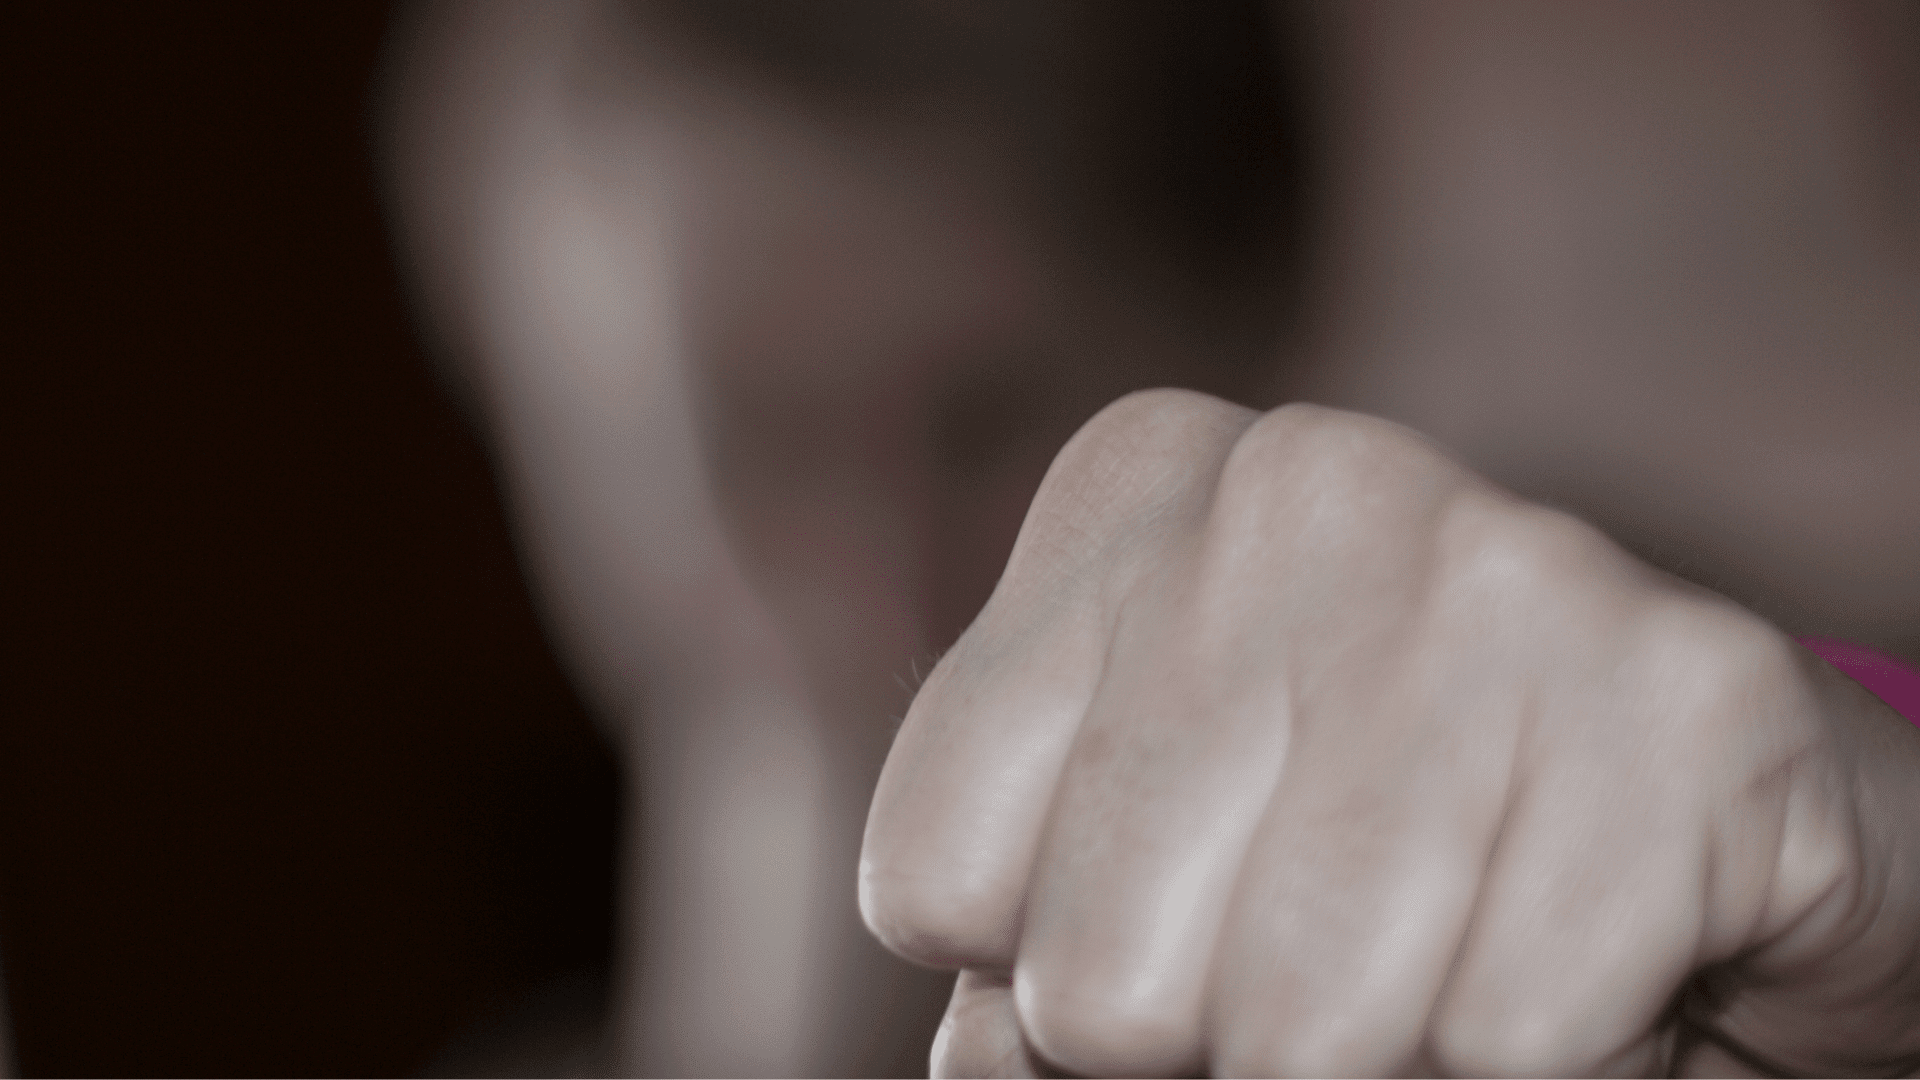 Domestic Violence vs Self-Defense: What is the Difference?